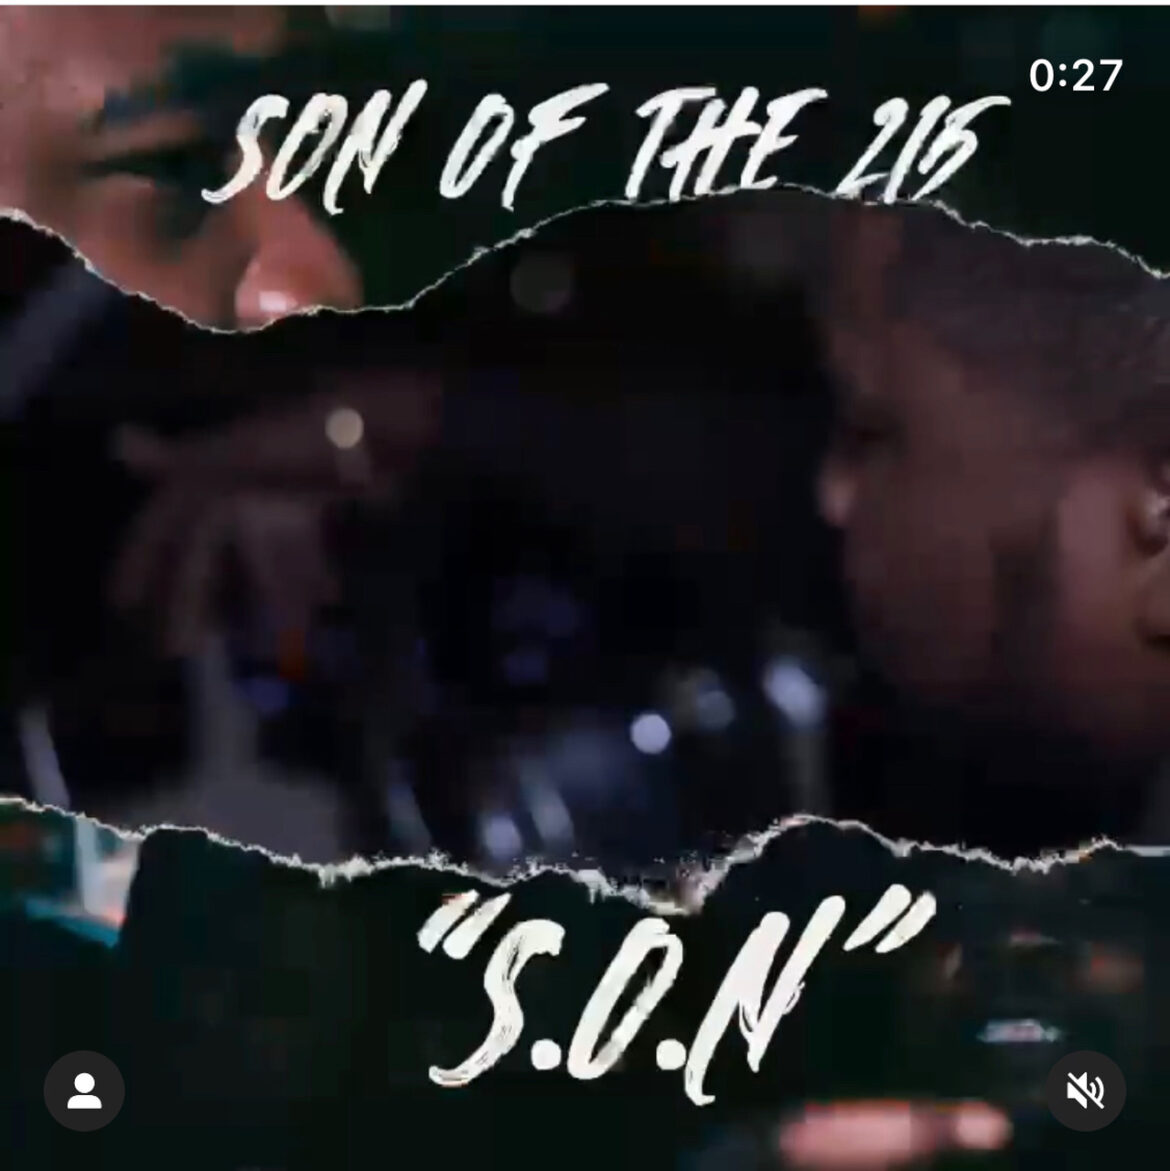 Son of the 215 – S.O.N